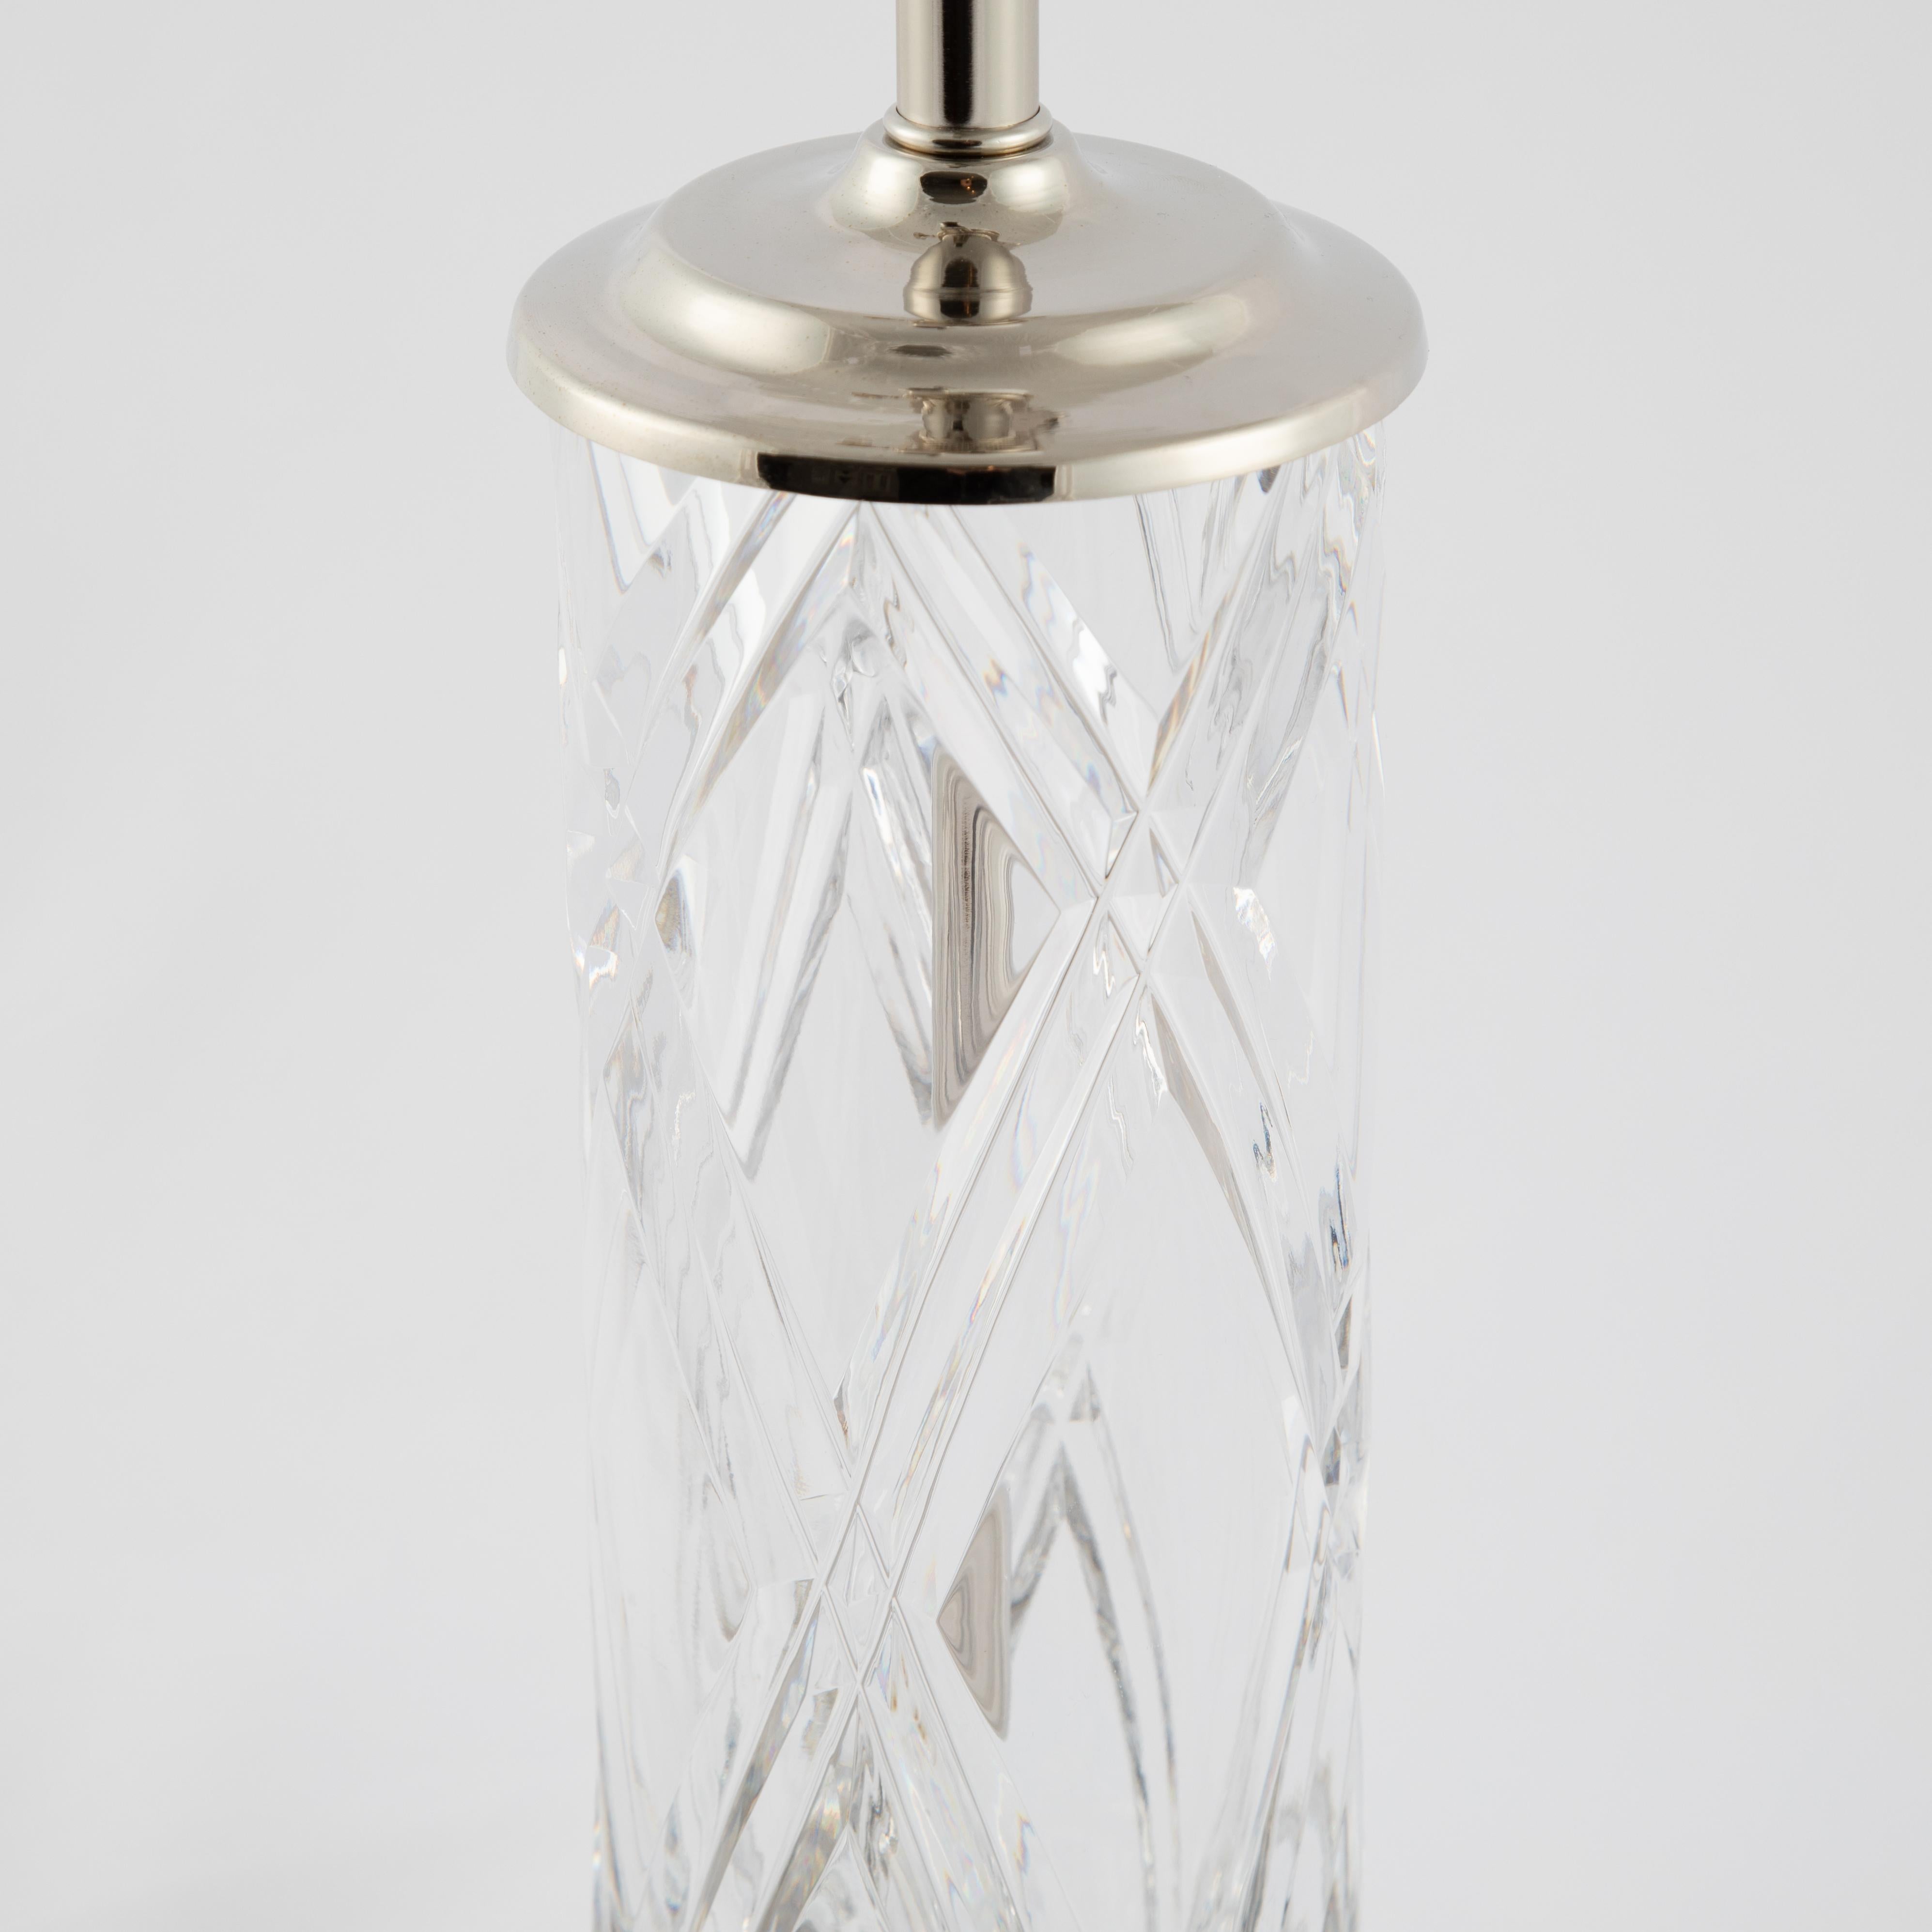 Olle Alberius for Orrefors Handcut Crystal Table Lamps, circa 1970s For Sale 2